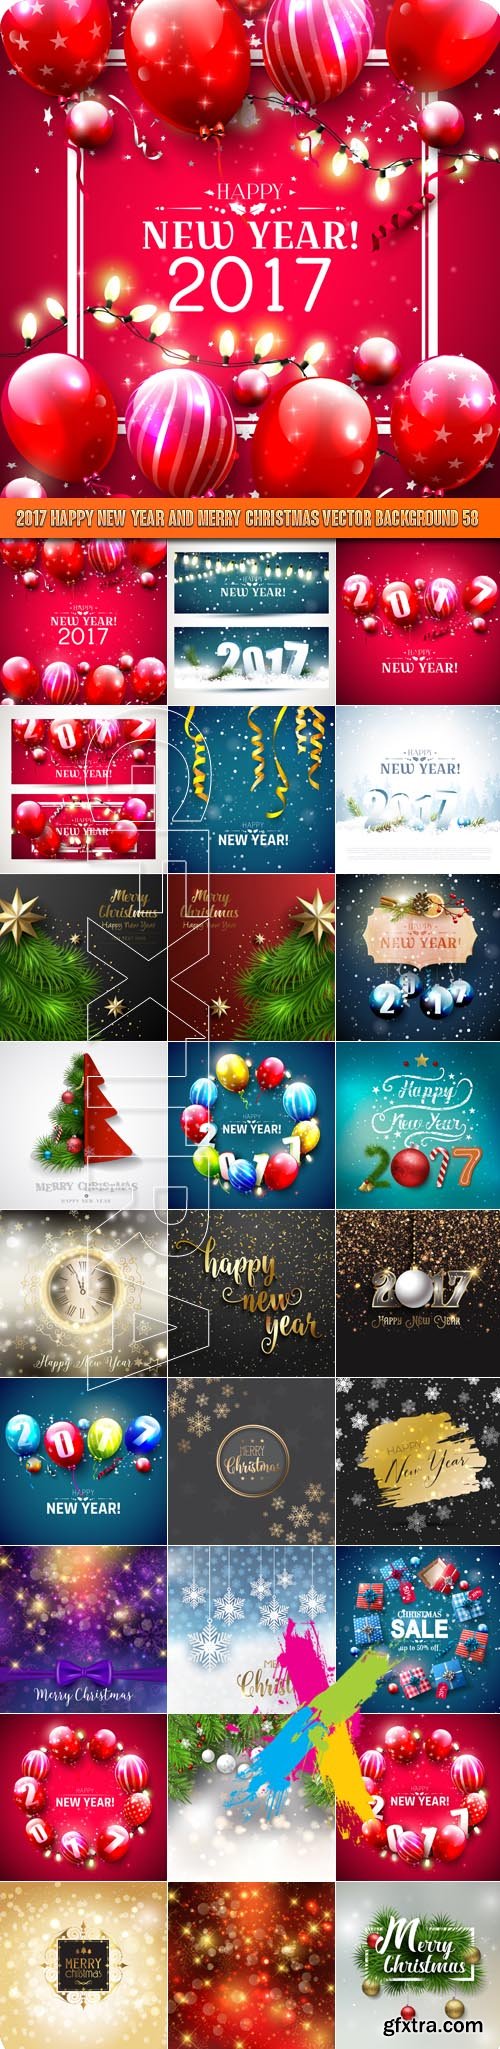 2017 Happy New Year and Merry Christmas vector background 58